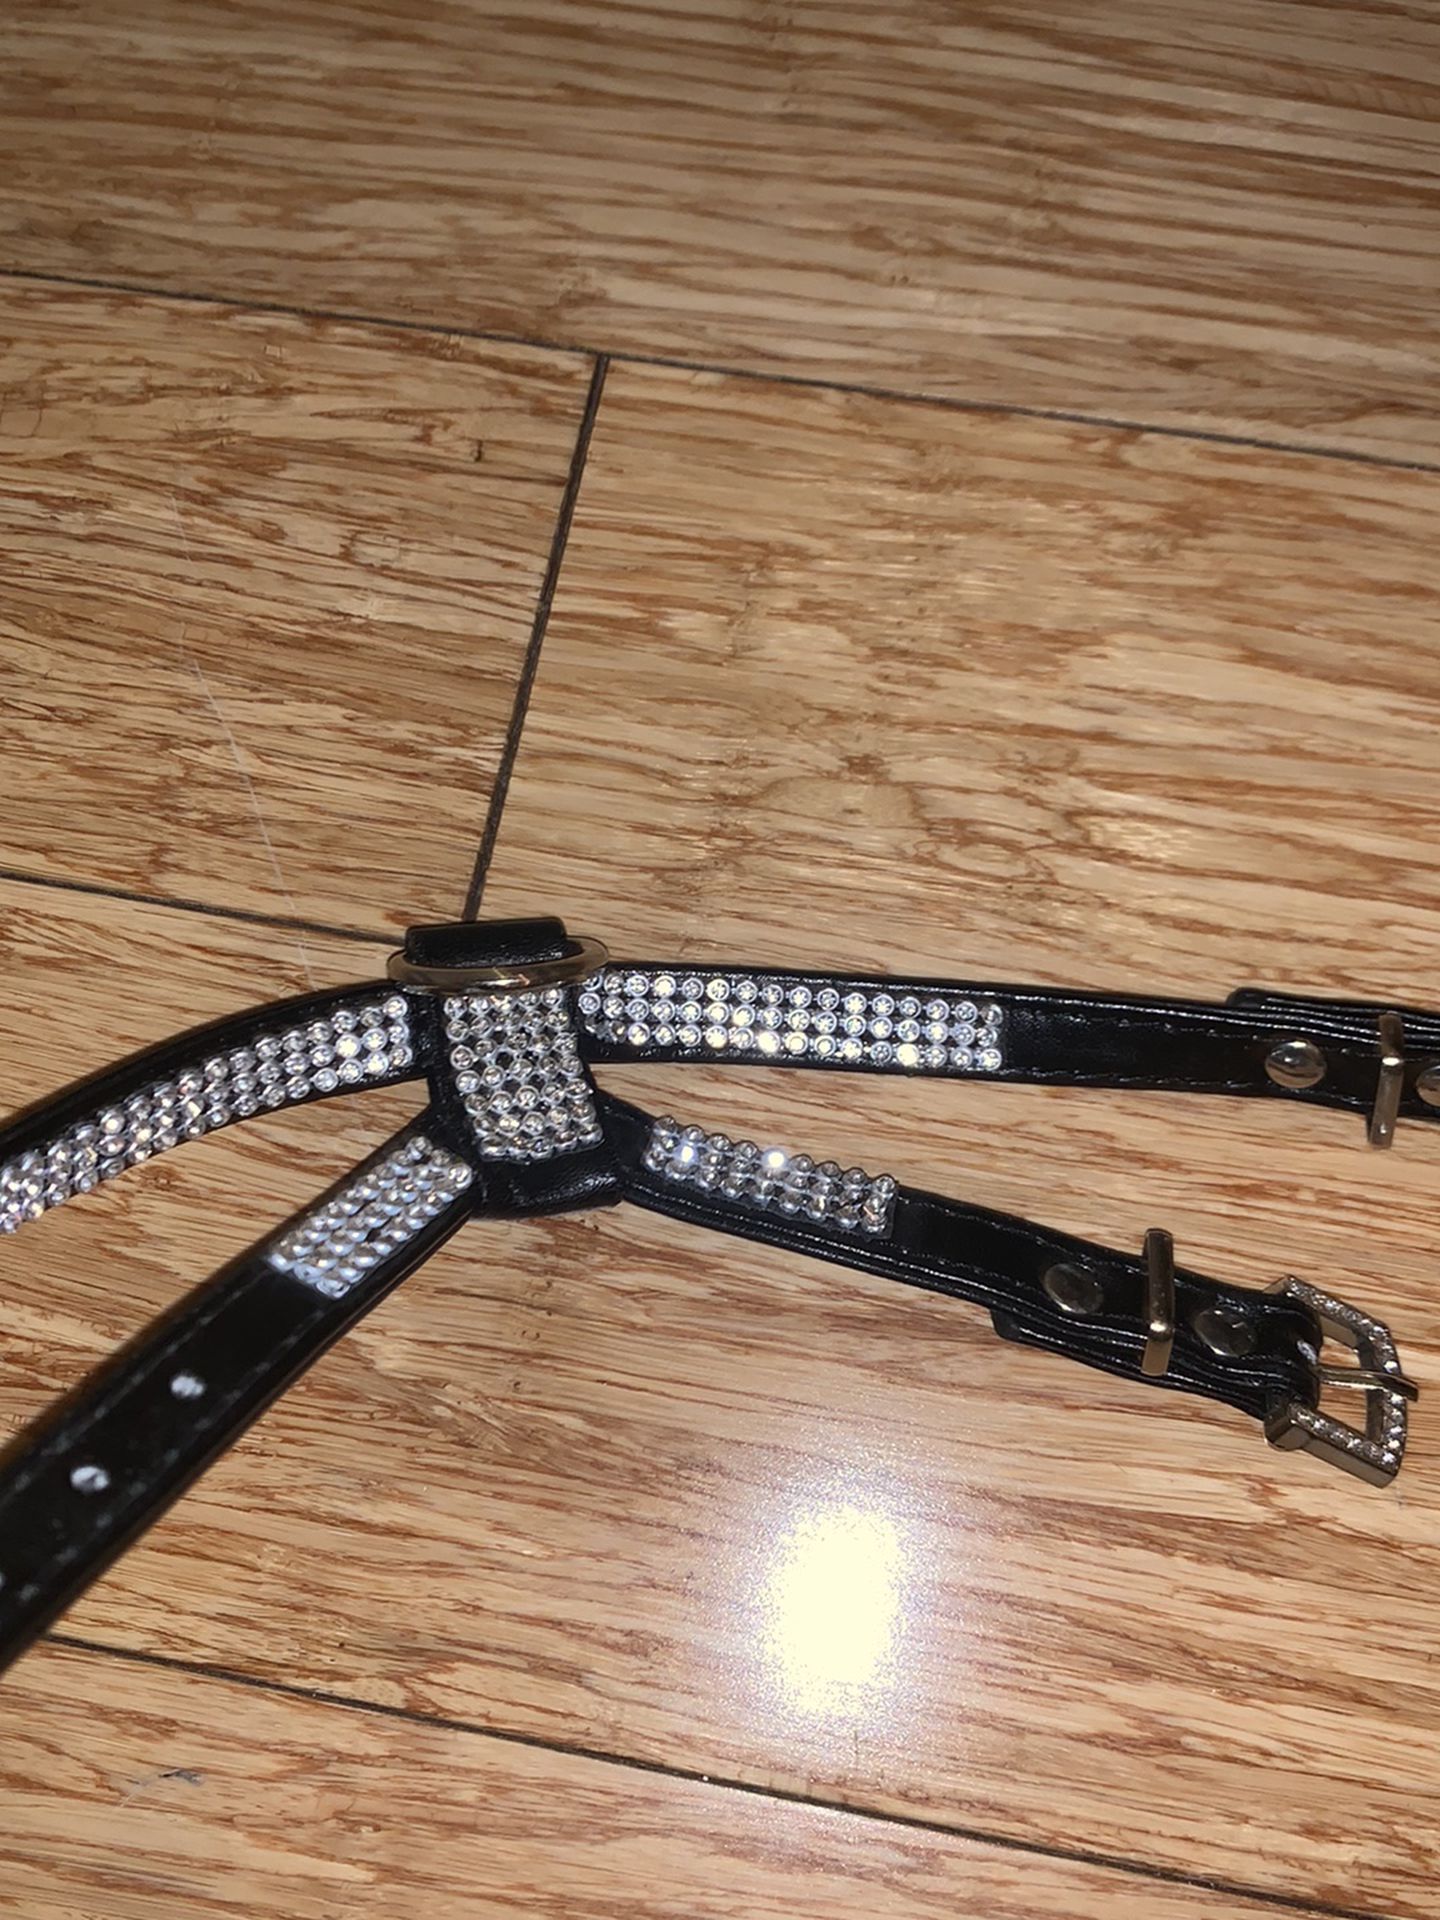 SMALL RHINESTONE BLACK SILVER PUPPY DOG HARNESS FAUX LEATHER BLING